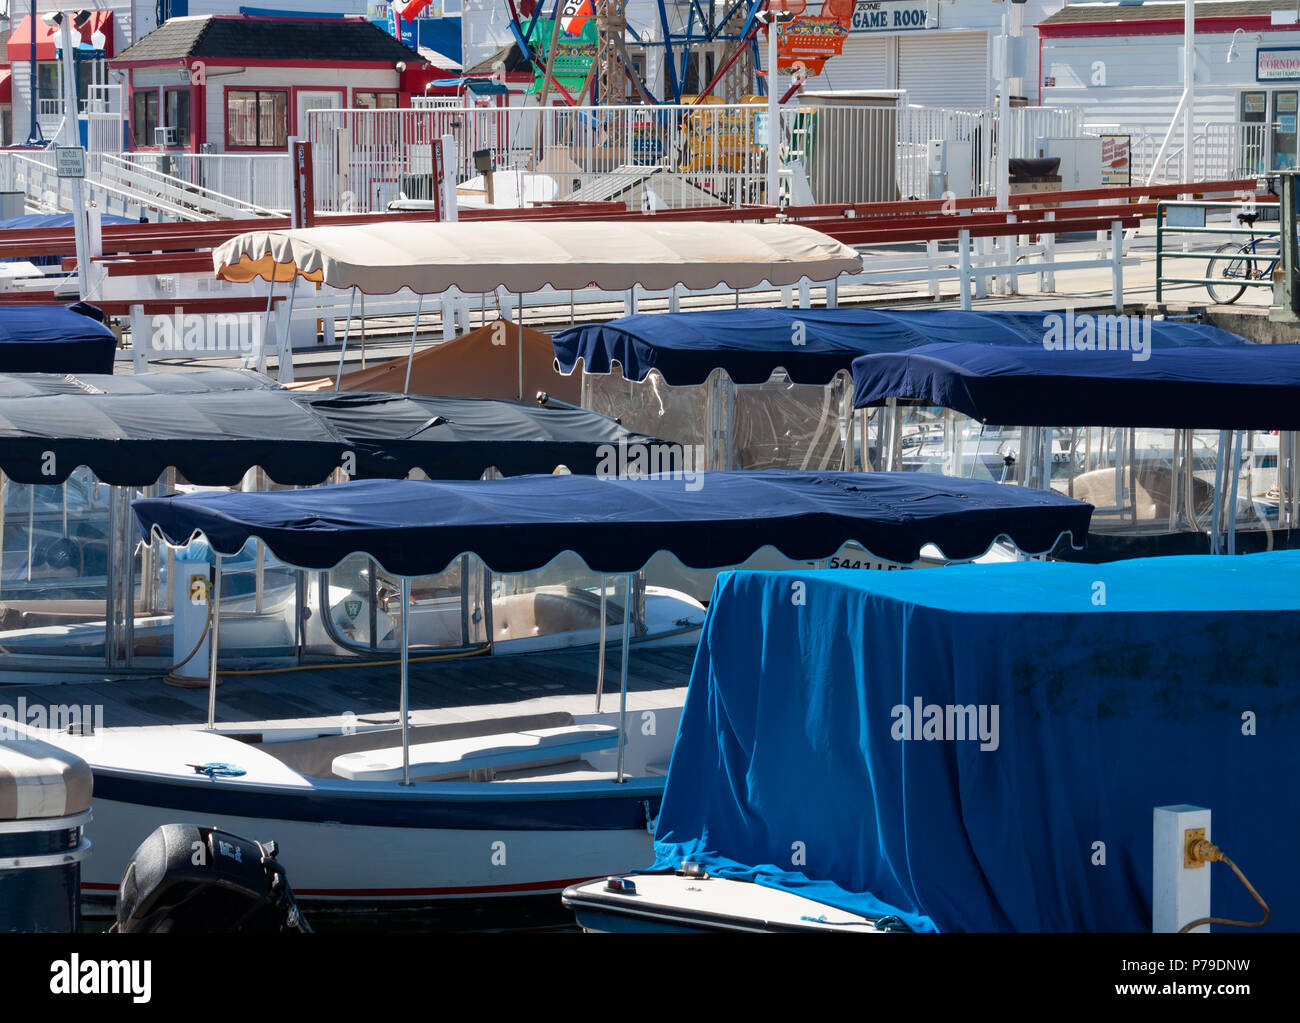 electric boat canopies at the Balboa fun zone in Newport Beach California on a sunny day Stock Photo